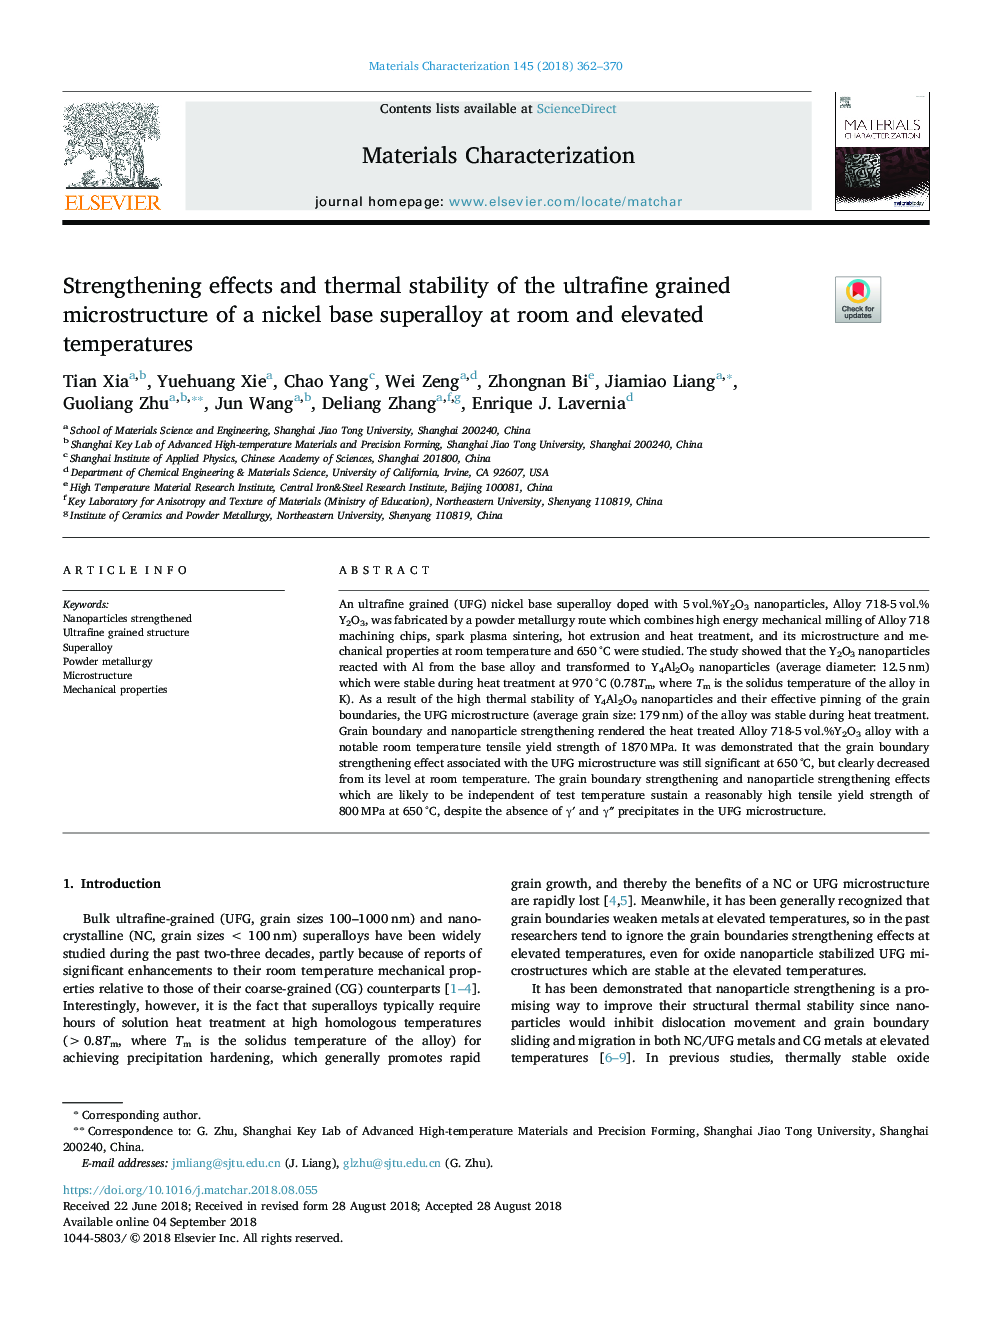 Strengthening effects and thermal stability of the ultrafine grained microstructure of a nickel base superalloy at room and elevated temperatures